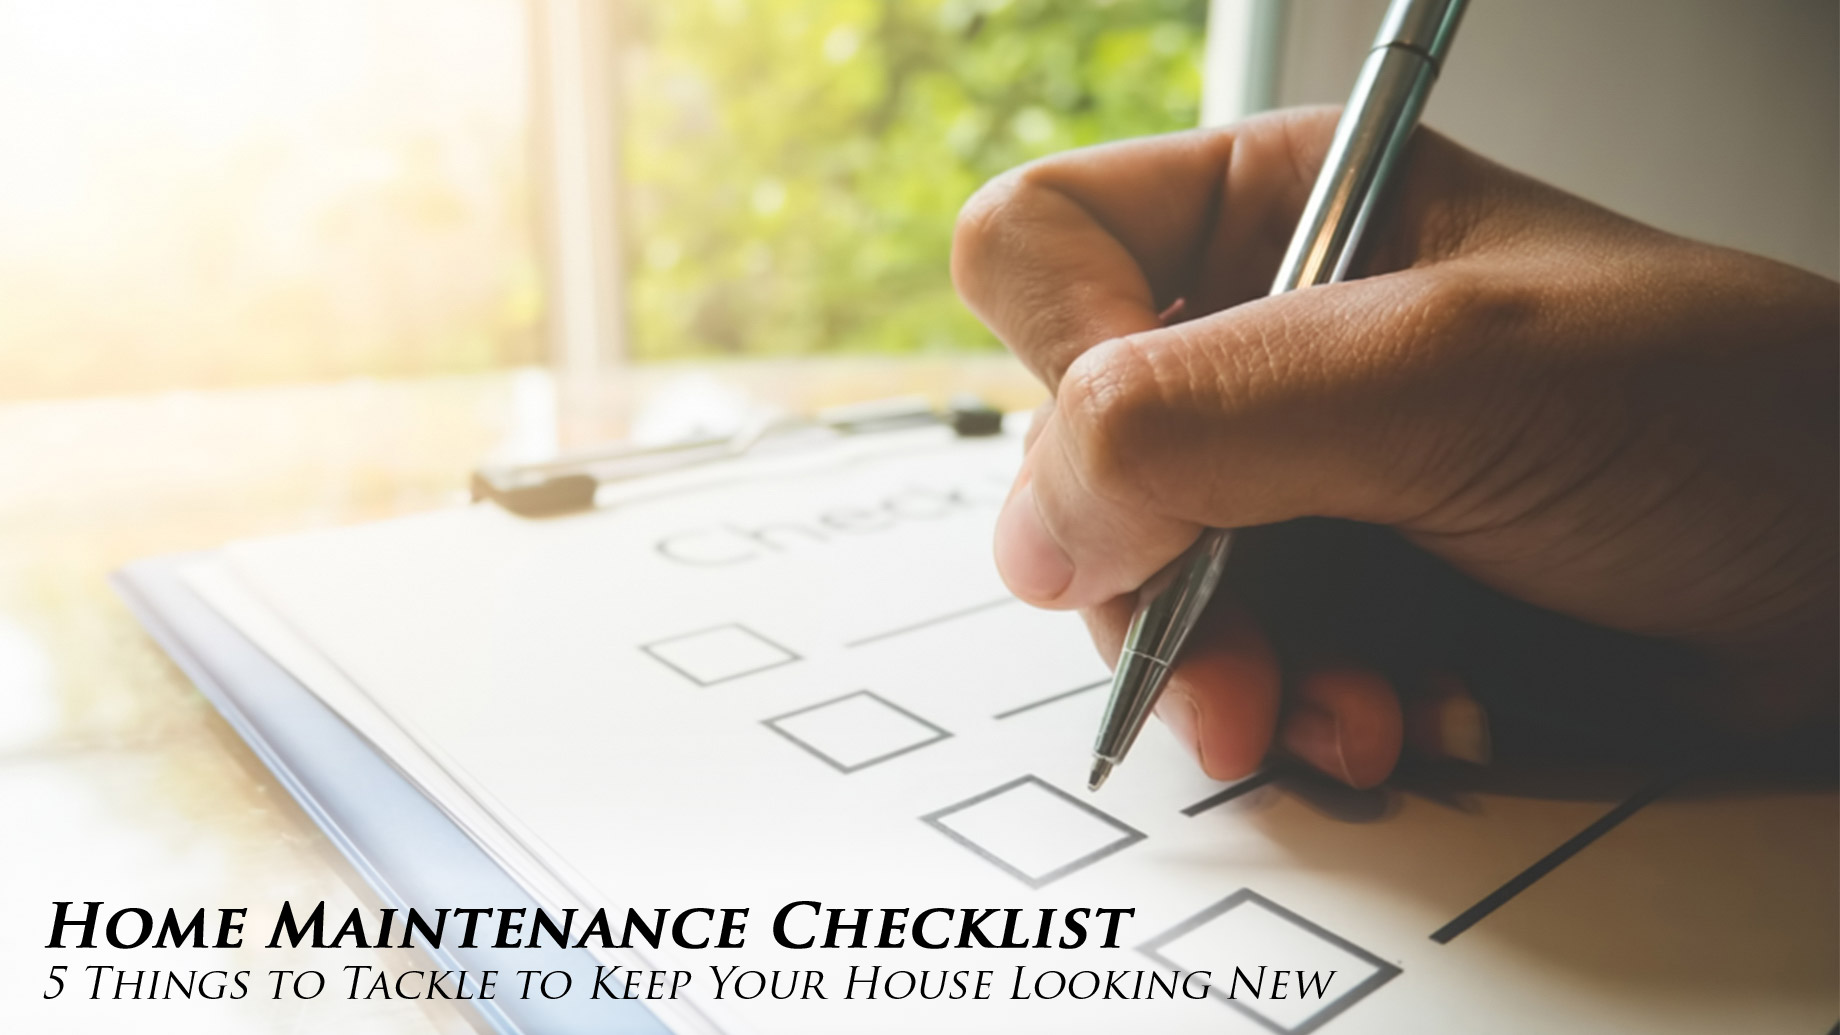 Home Maintenance Checklist - 5 Things to Tackle to Keep Your House Looking New